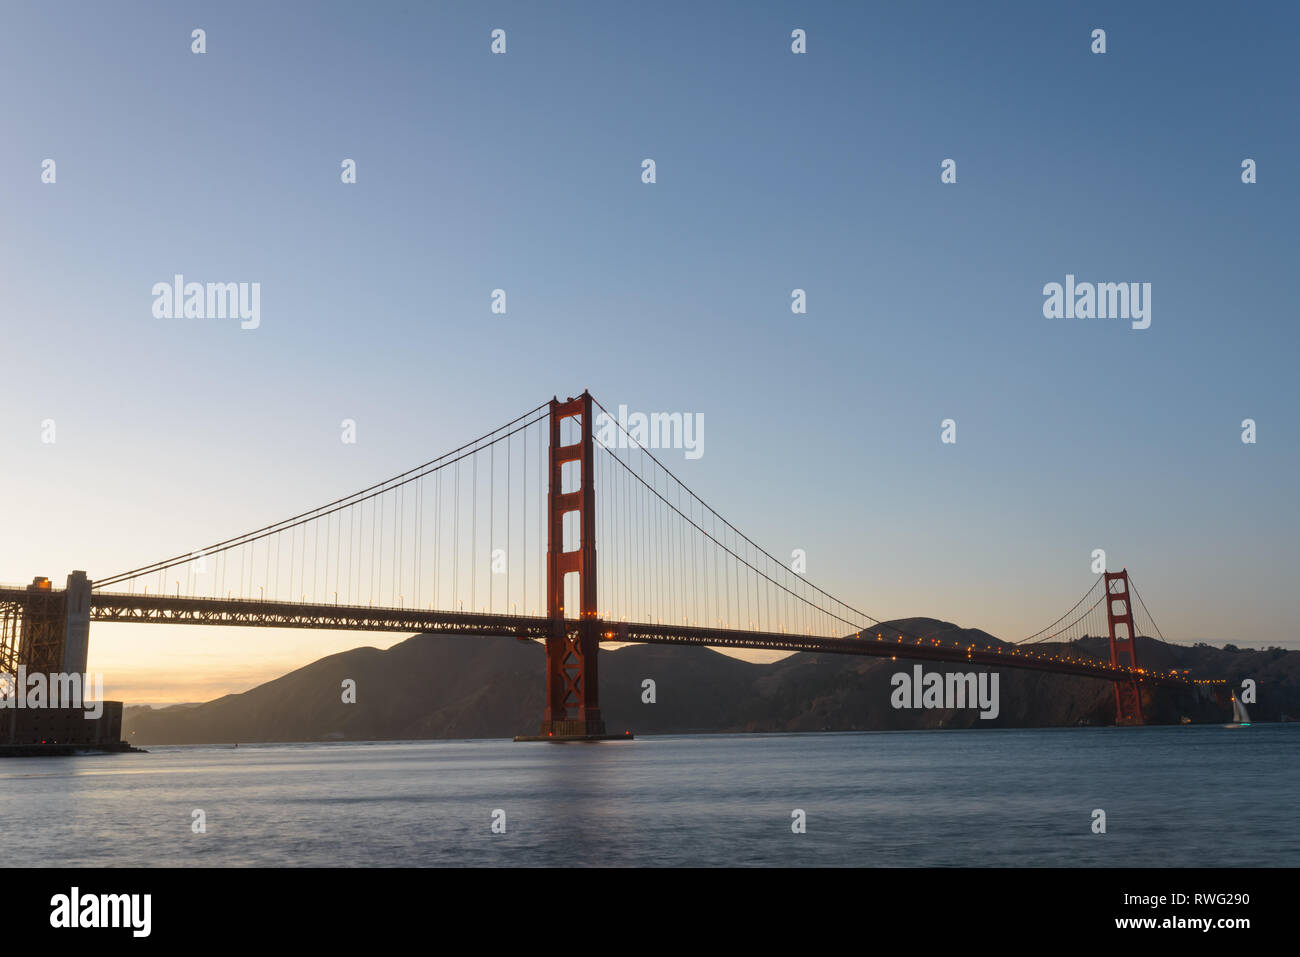 Towers of the Golden Gate Bridge rise above the water at dusk Stock Photo